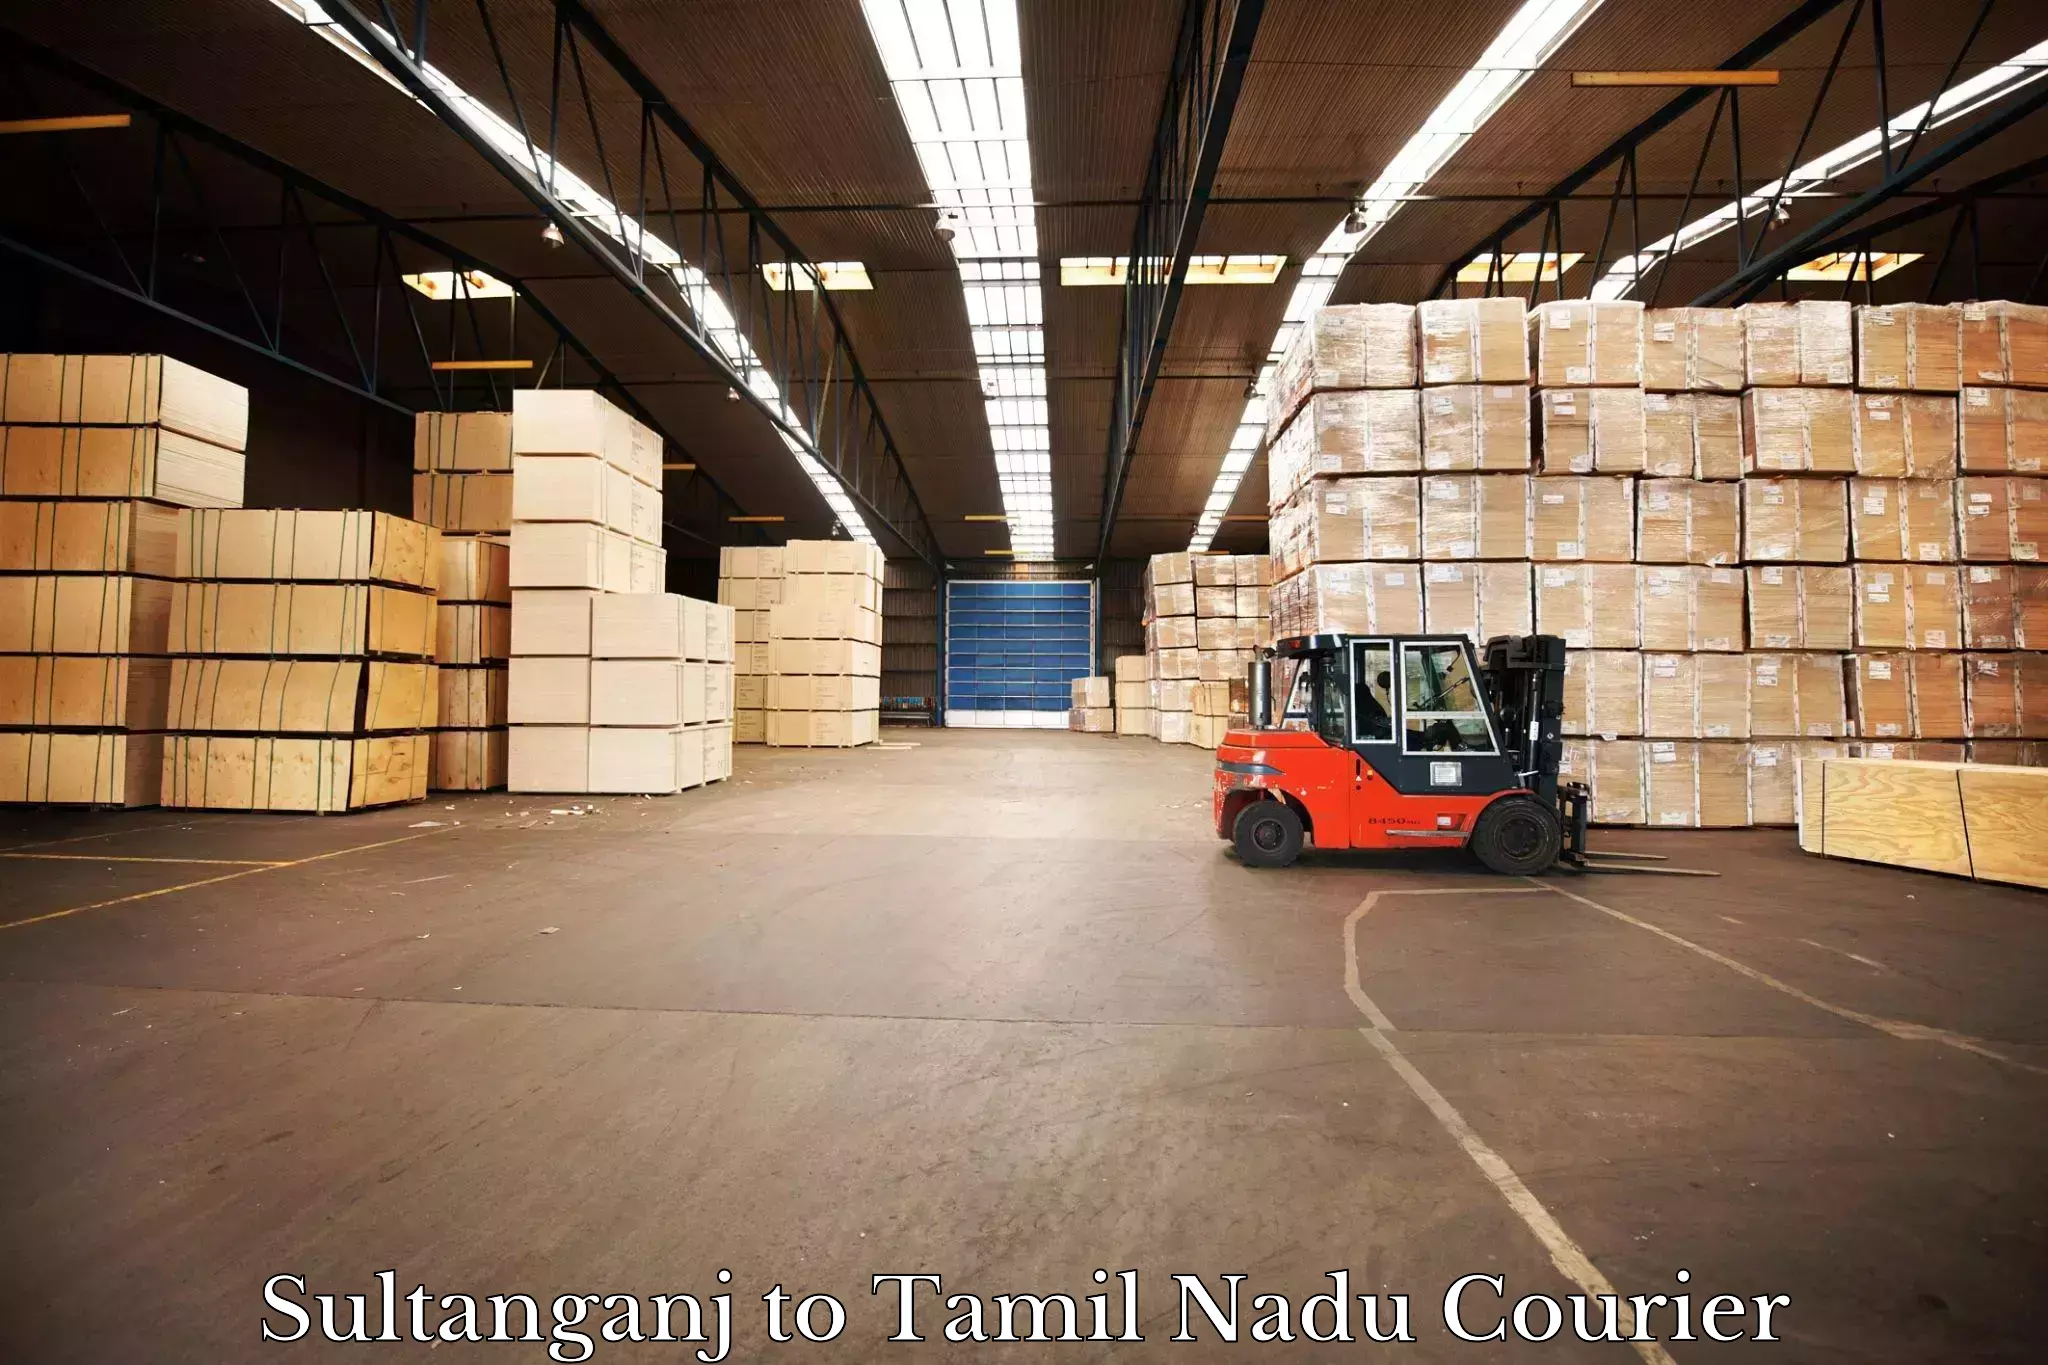 Courier service innovation in Sultanganj to Tamil Nadu